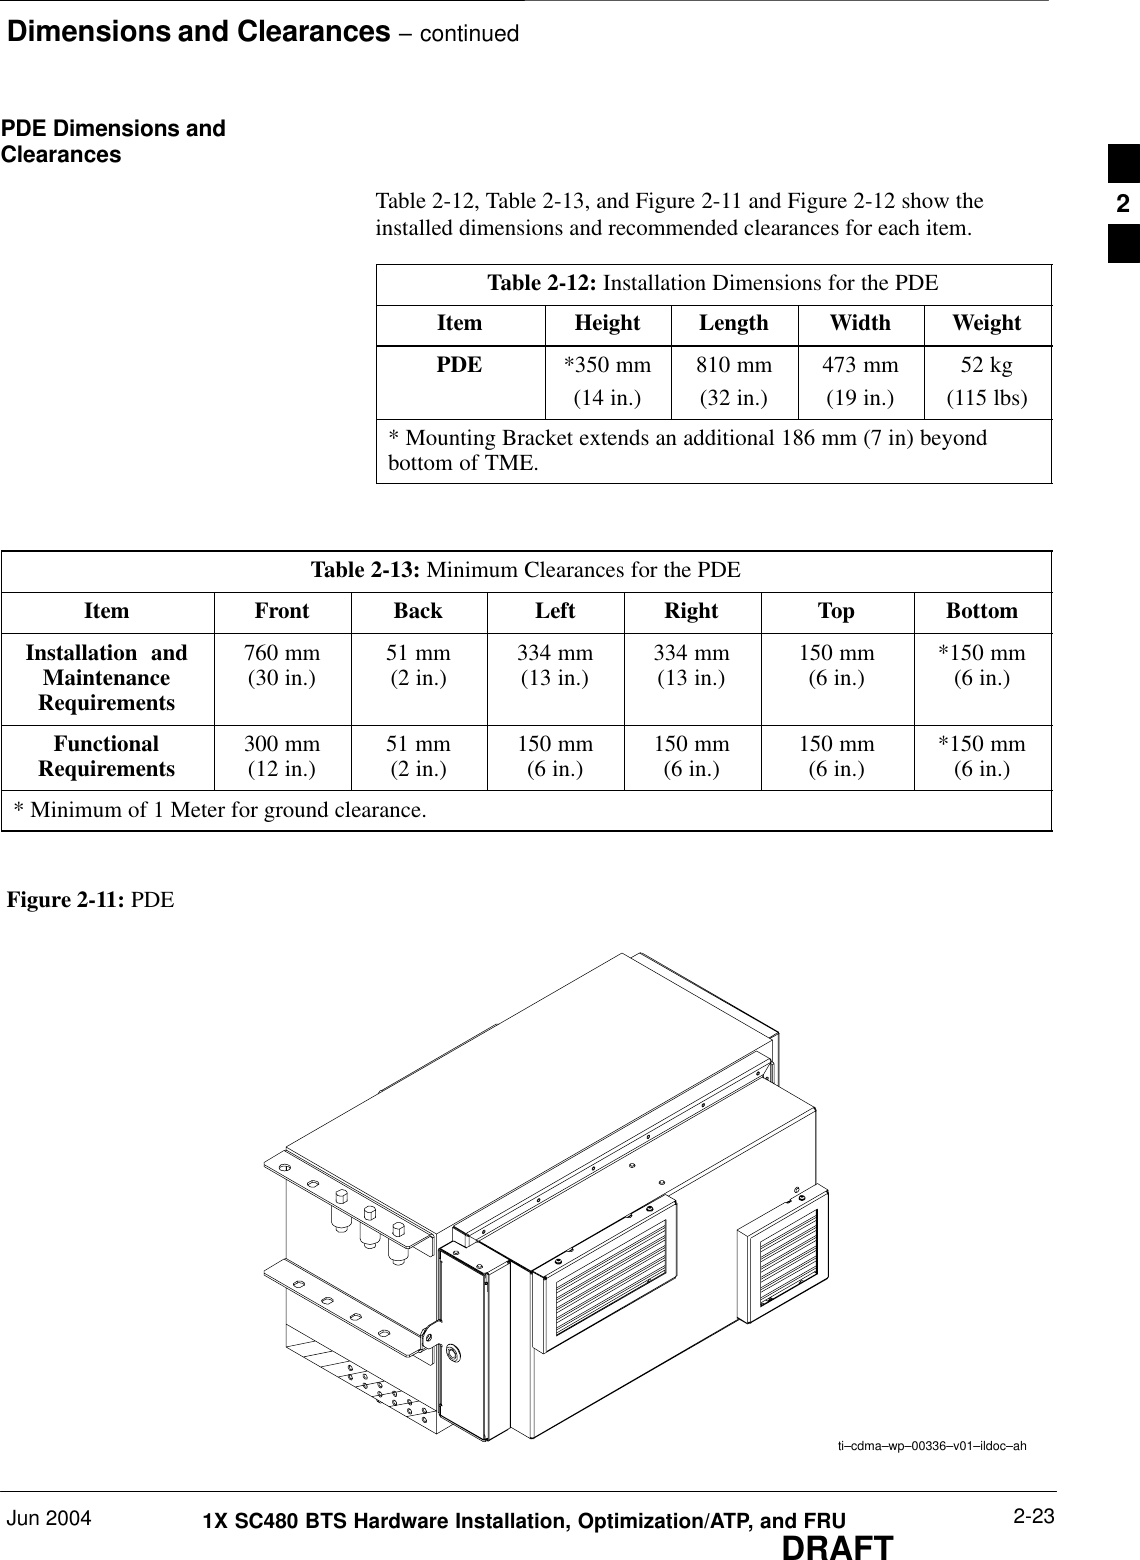 Dimensions and Clearances – continuedJun 2004 2-231X SC480 BTS Hardware Installation, Optimization/ATP, and FRUDRAFTPDE Dimensions andClearancesTable 2-12, Table 2-13, and Figure 2-11 and Figure 2-12 show theinstalled dimensions and recommended clearances for each item.Table 2-12: Installation Dimensions for the PDEItem Height Length Width WeightPDE *350 mm(14 in.)810 mm(32 in.)473 mm(19 in.)52 kg(115 lbs)* Mounting Bracket extends an additional 186 mm (7 in) beyondbottom of TME.Table 2-13: Minimum Clearances for the PDEItem Front Back Left Right Top BottomInstallation  andMaintenanceRequirements760 mm(30 in.) 51 mm(2 in.) 334 mm(13 in.) 334 mm(13 in.) 150 mm(6 in.) *150 mm(6 in.)FunctionalRequirements 300 mm(12 in.) 51 mm(2 in.) 150 mm(6 in.) 150 mm(6 in.) 150 mm(6 in.) *150 mm(6 in.)* Minimum of 1 Meter for ground clearance.Figure 2-11: PDEti–cdma–wp–00336–v01–ildoc–ah2